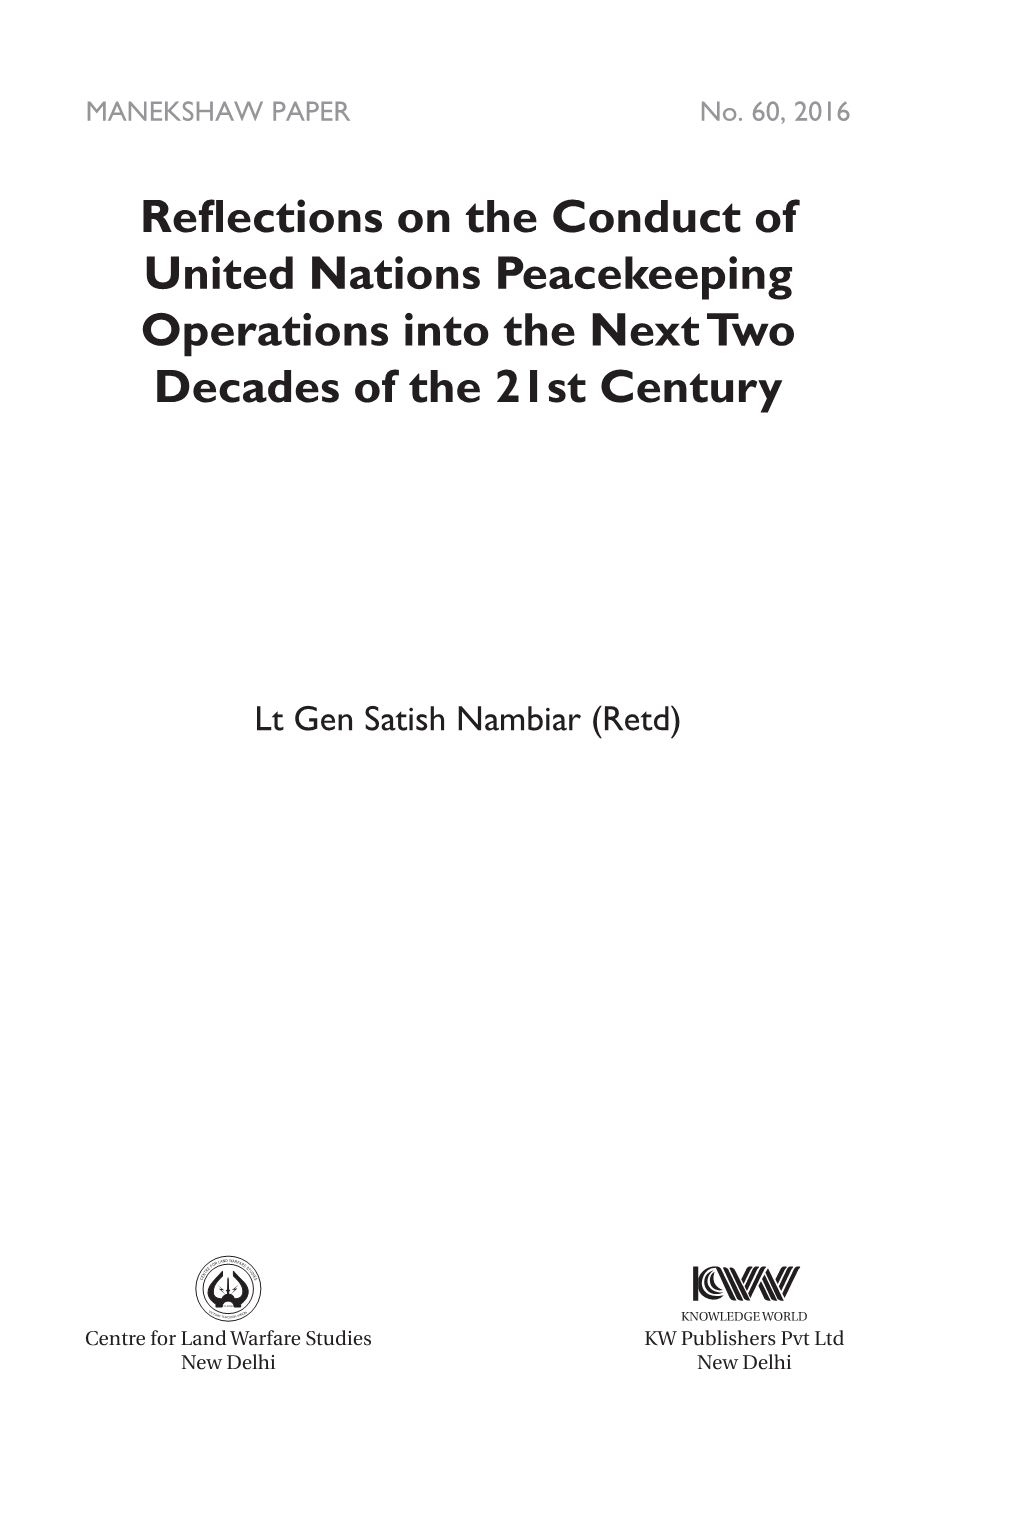 Reflections on the Conduct of United Nations Peacekeeping Operations Into the Next Two Decades of the 21St Century